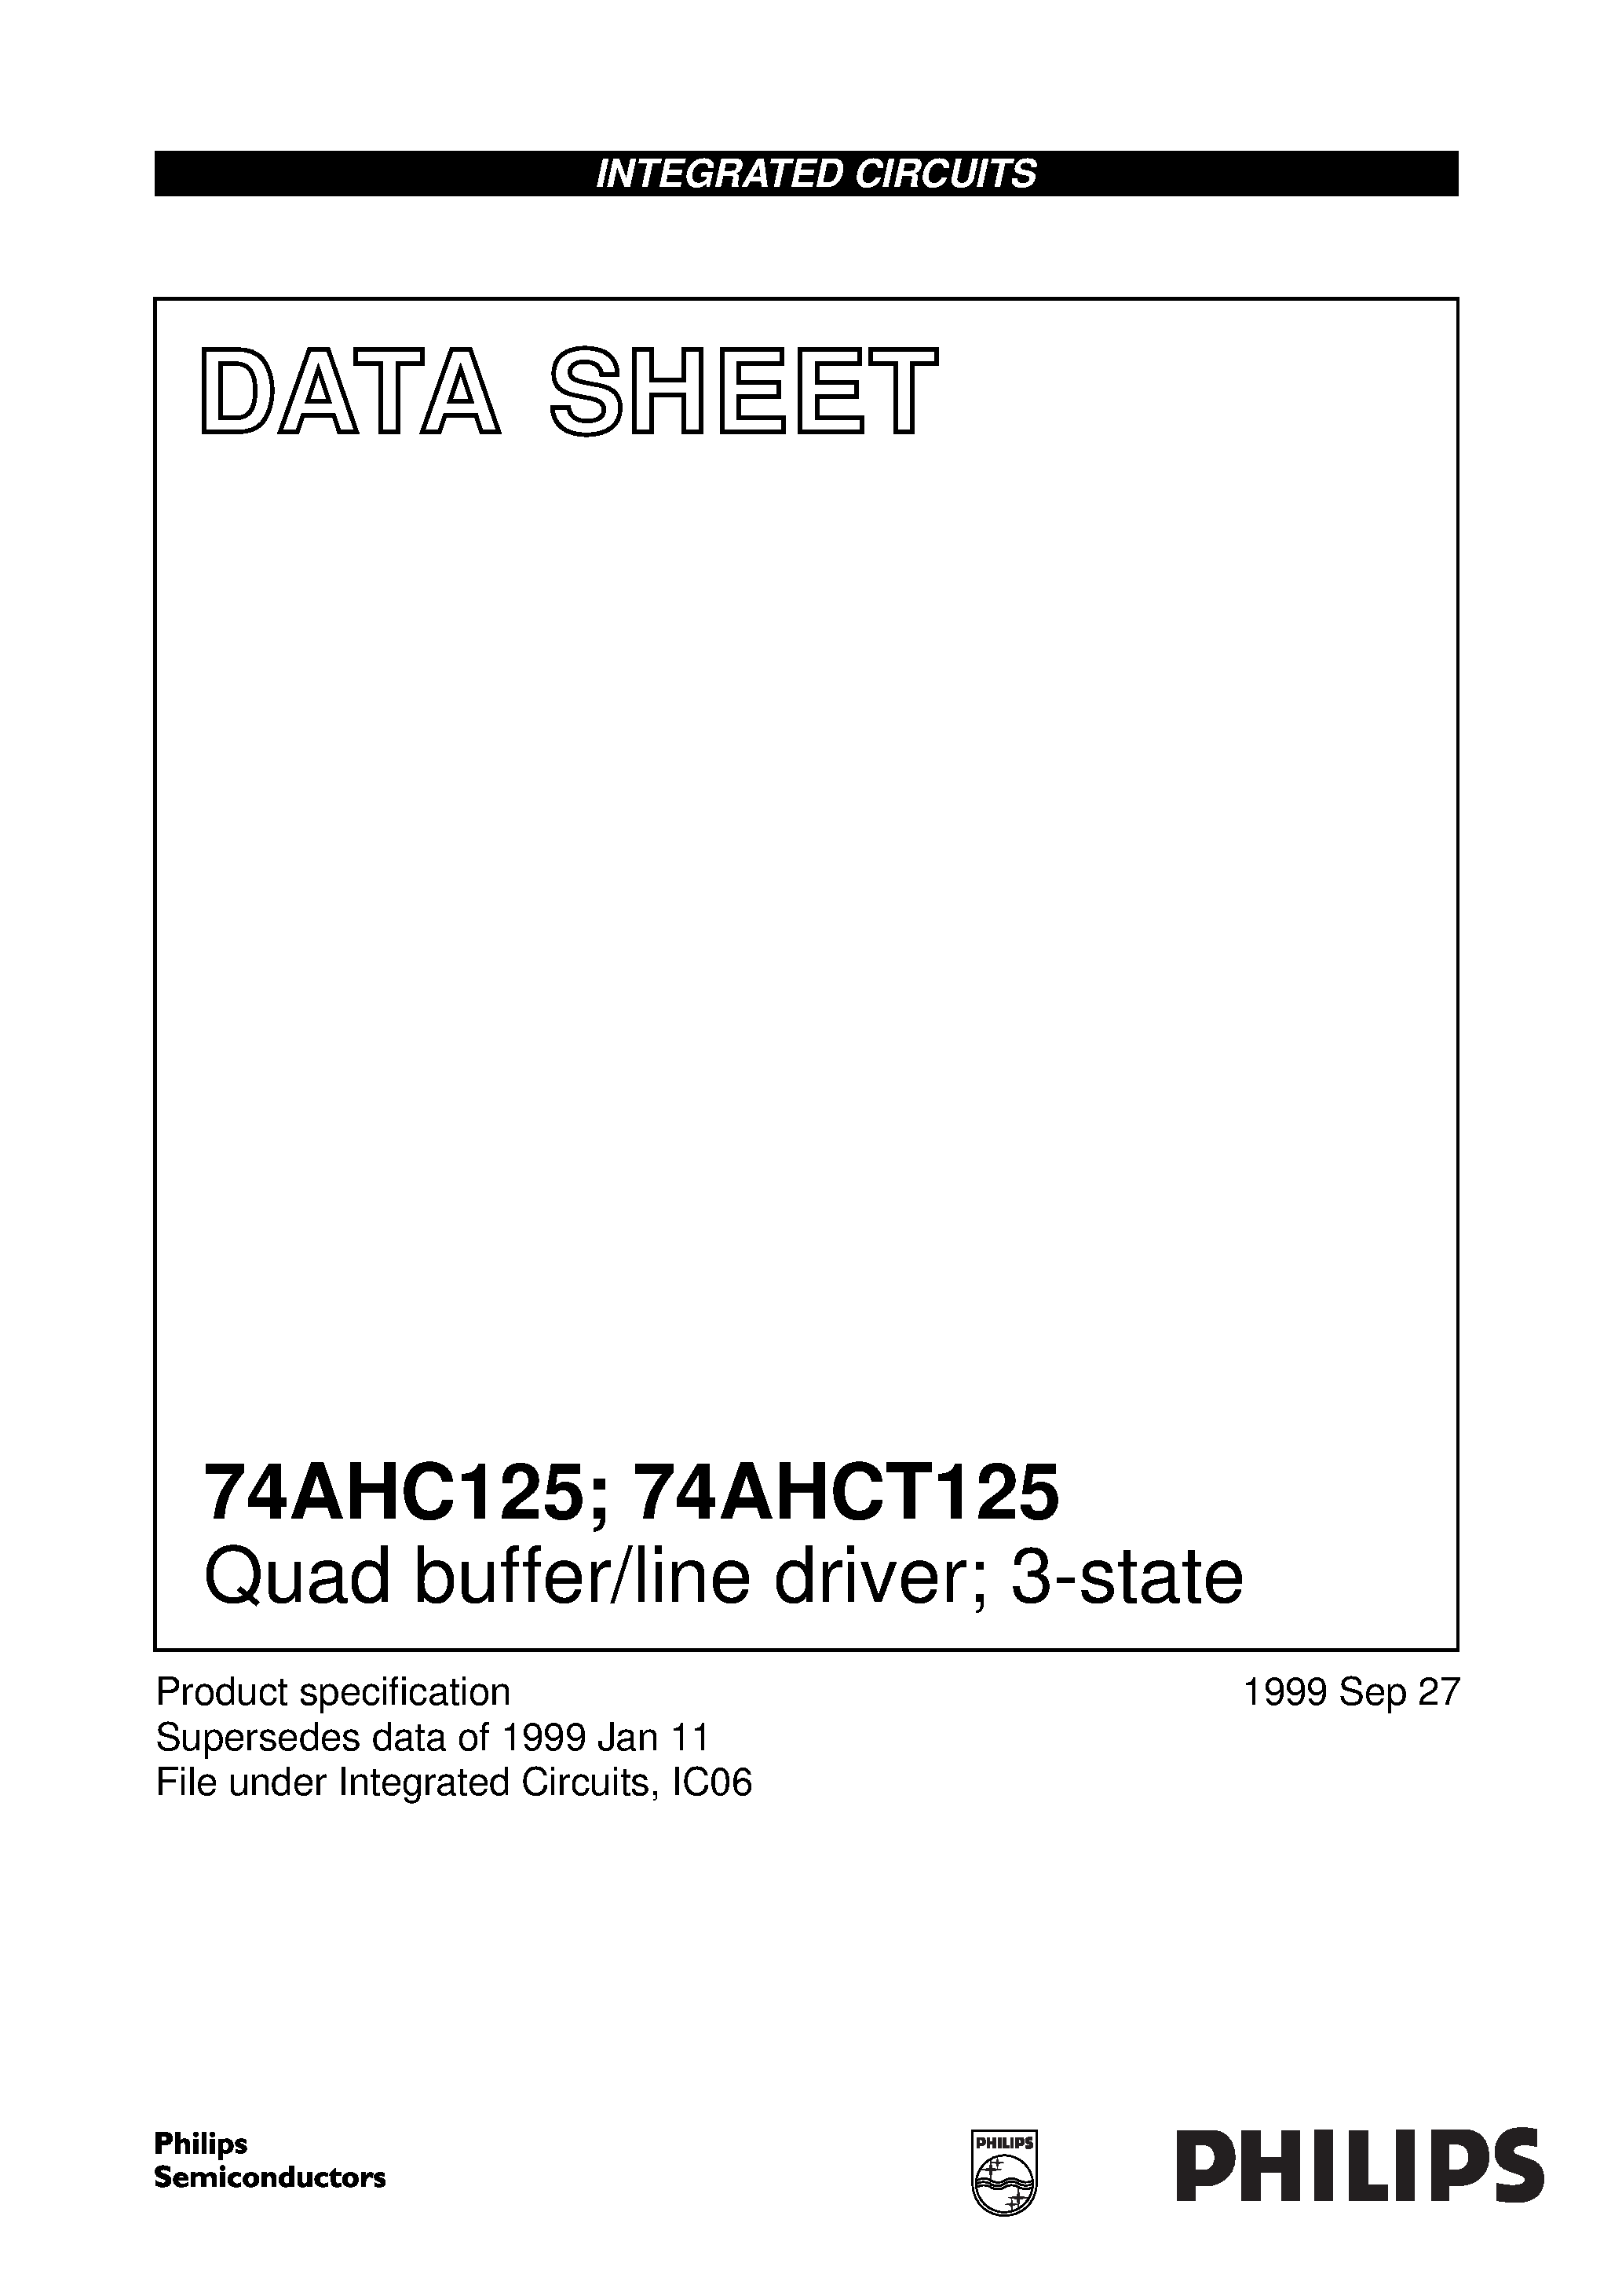 Datasheet 74AHC125PWDH - Quad buffer/line driver; 3-state page 1